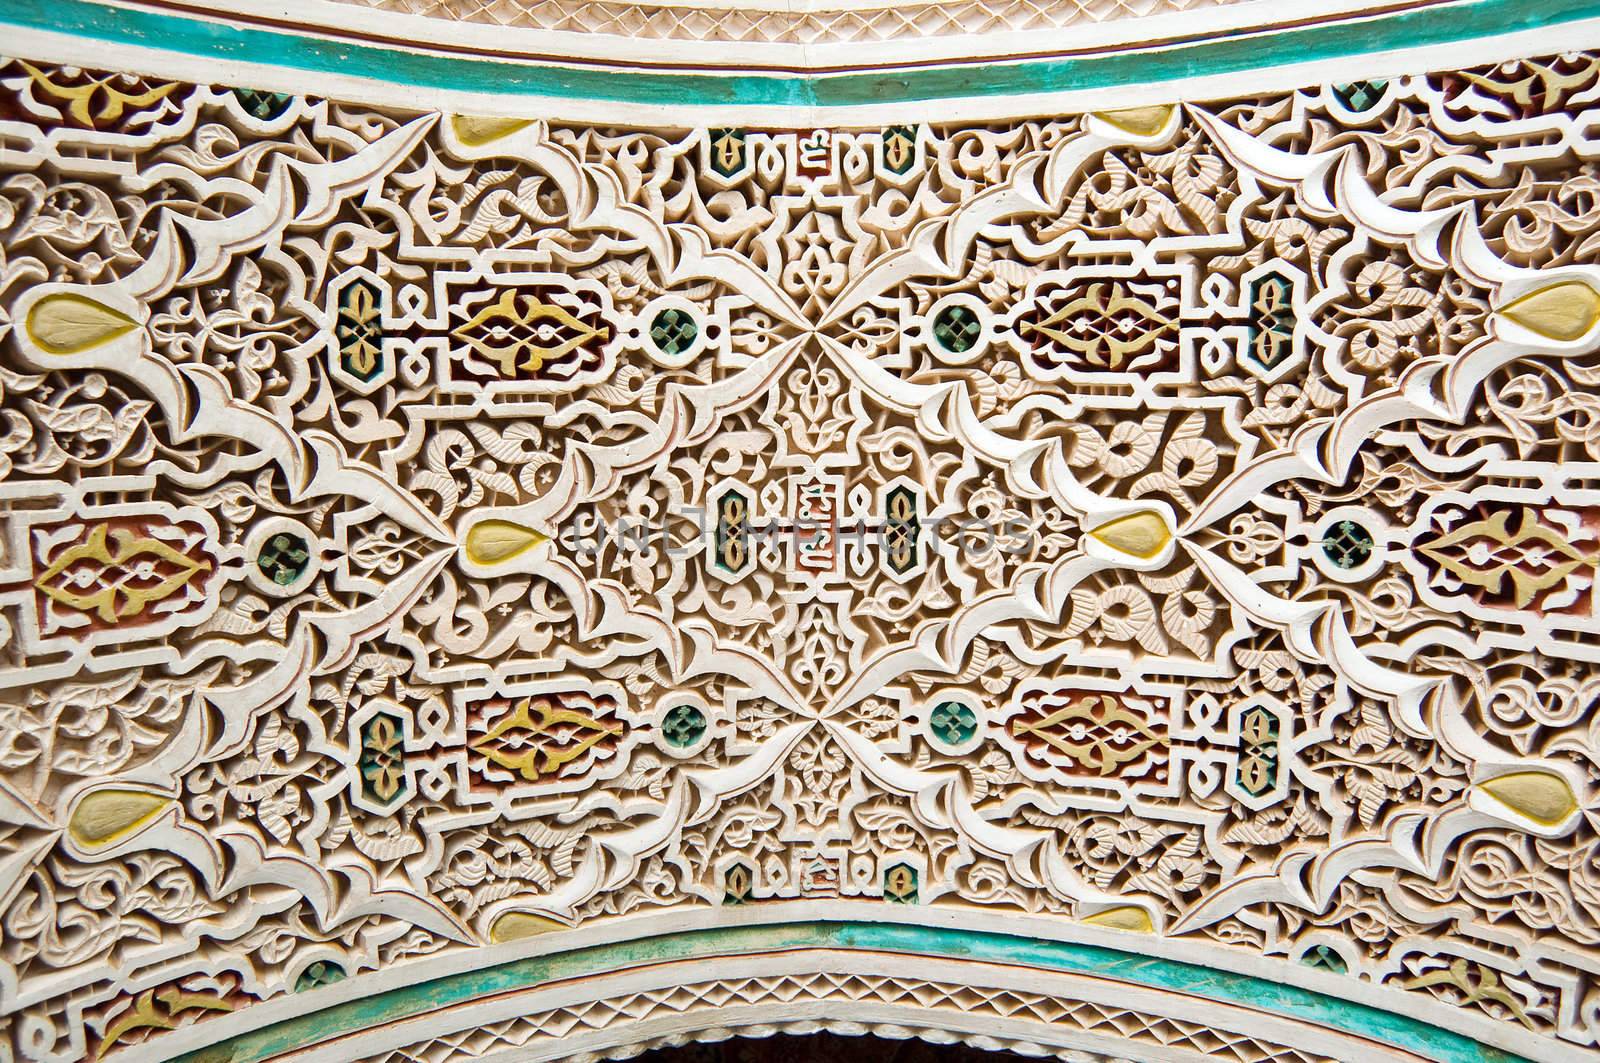 Stucco details of Bahia Palace in Marrakesh, Morocco